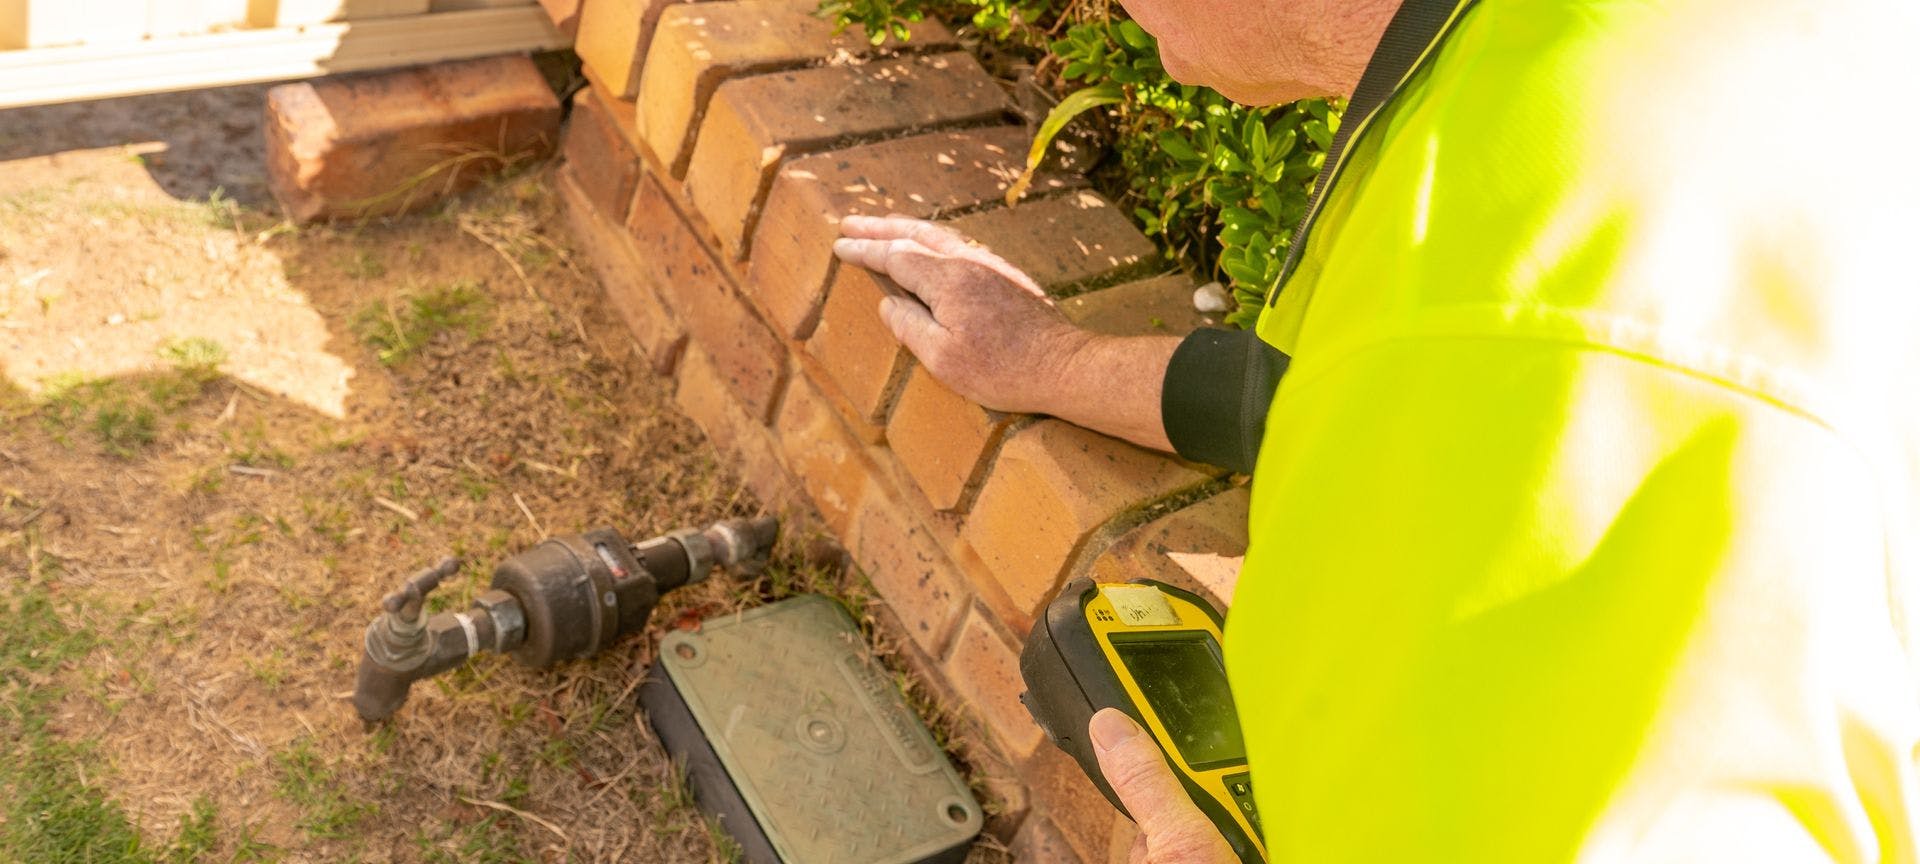 Aqwest employee holding a monitoring device looking over a water meter